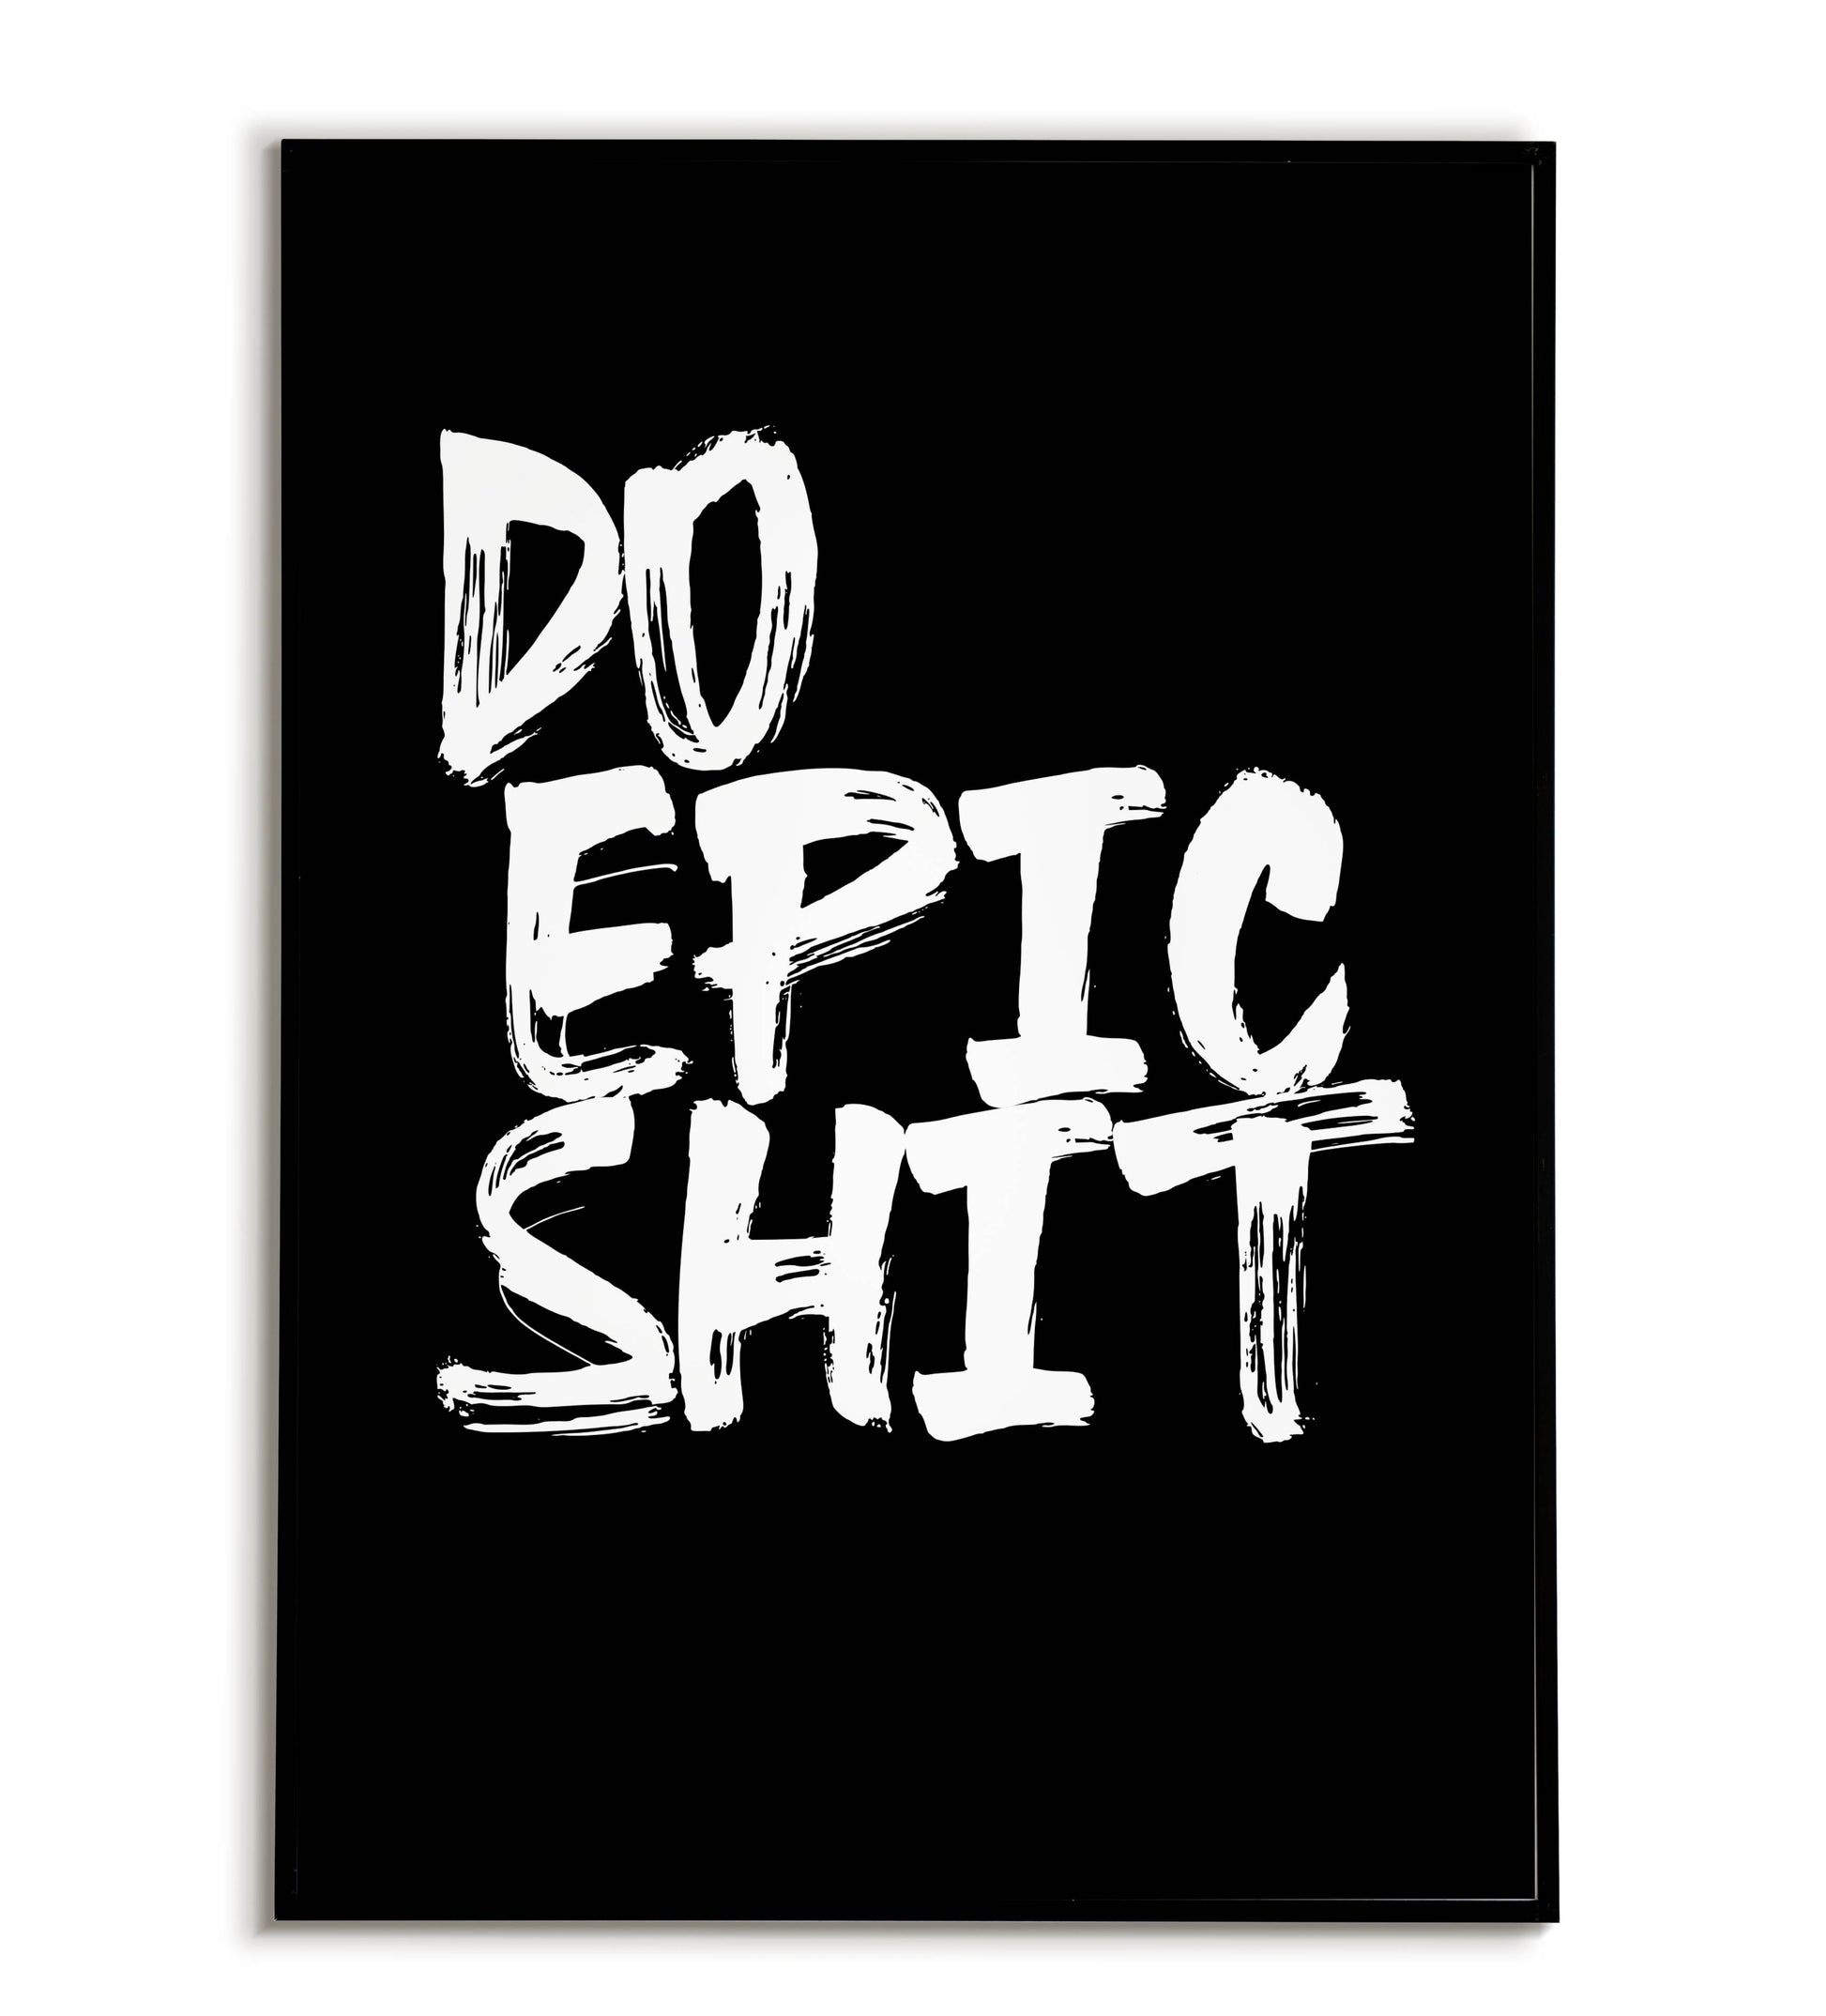 Motivational "Do epic shit" printable poster, encourage bold action and pursuing your passions.	